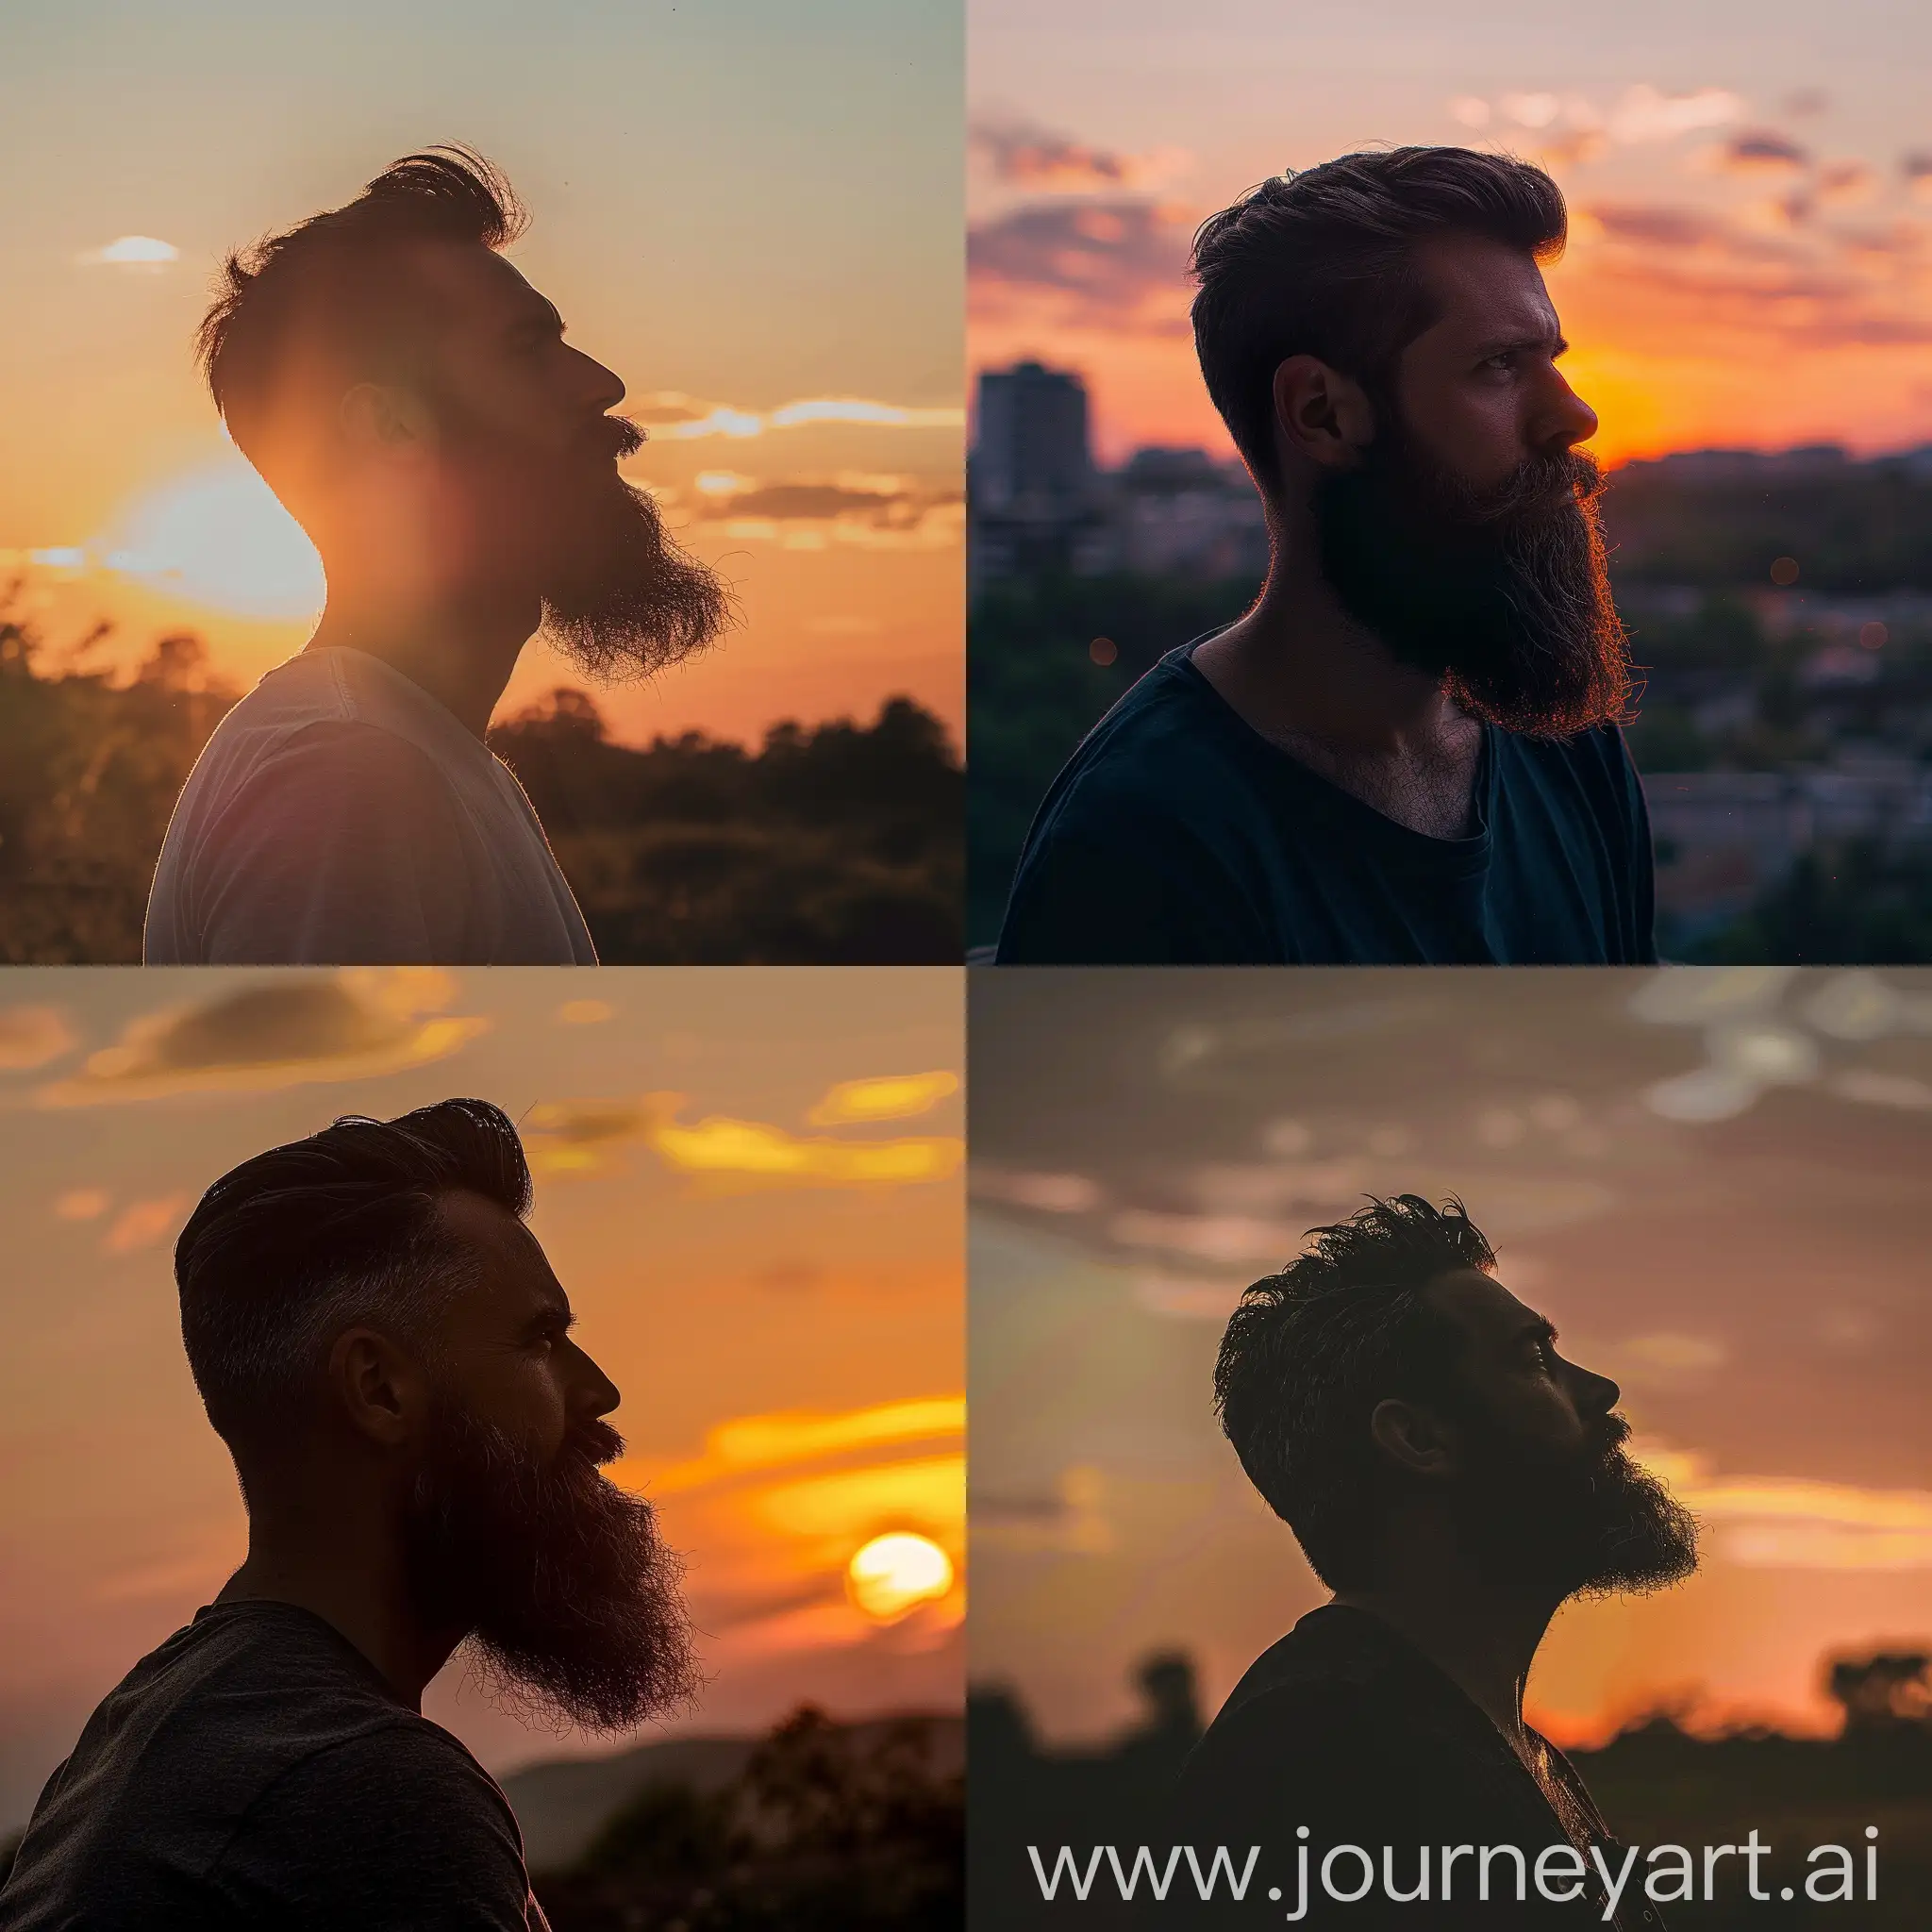 Silhouetted-Man-Admiring-Sunset-Peaceful-Moment-Captured